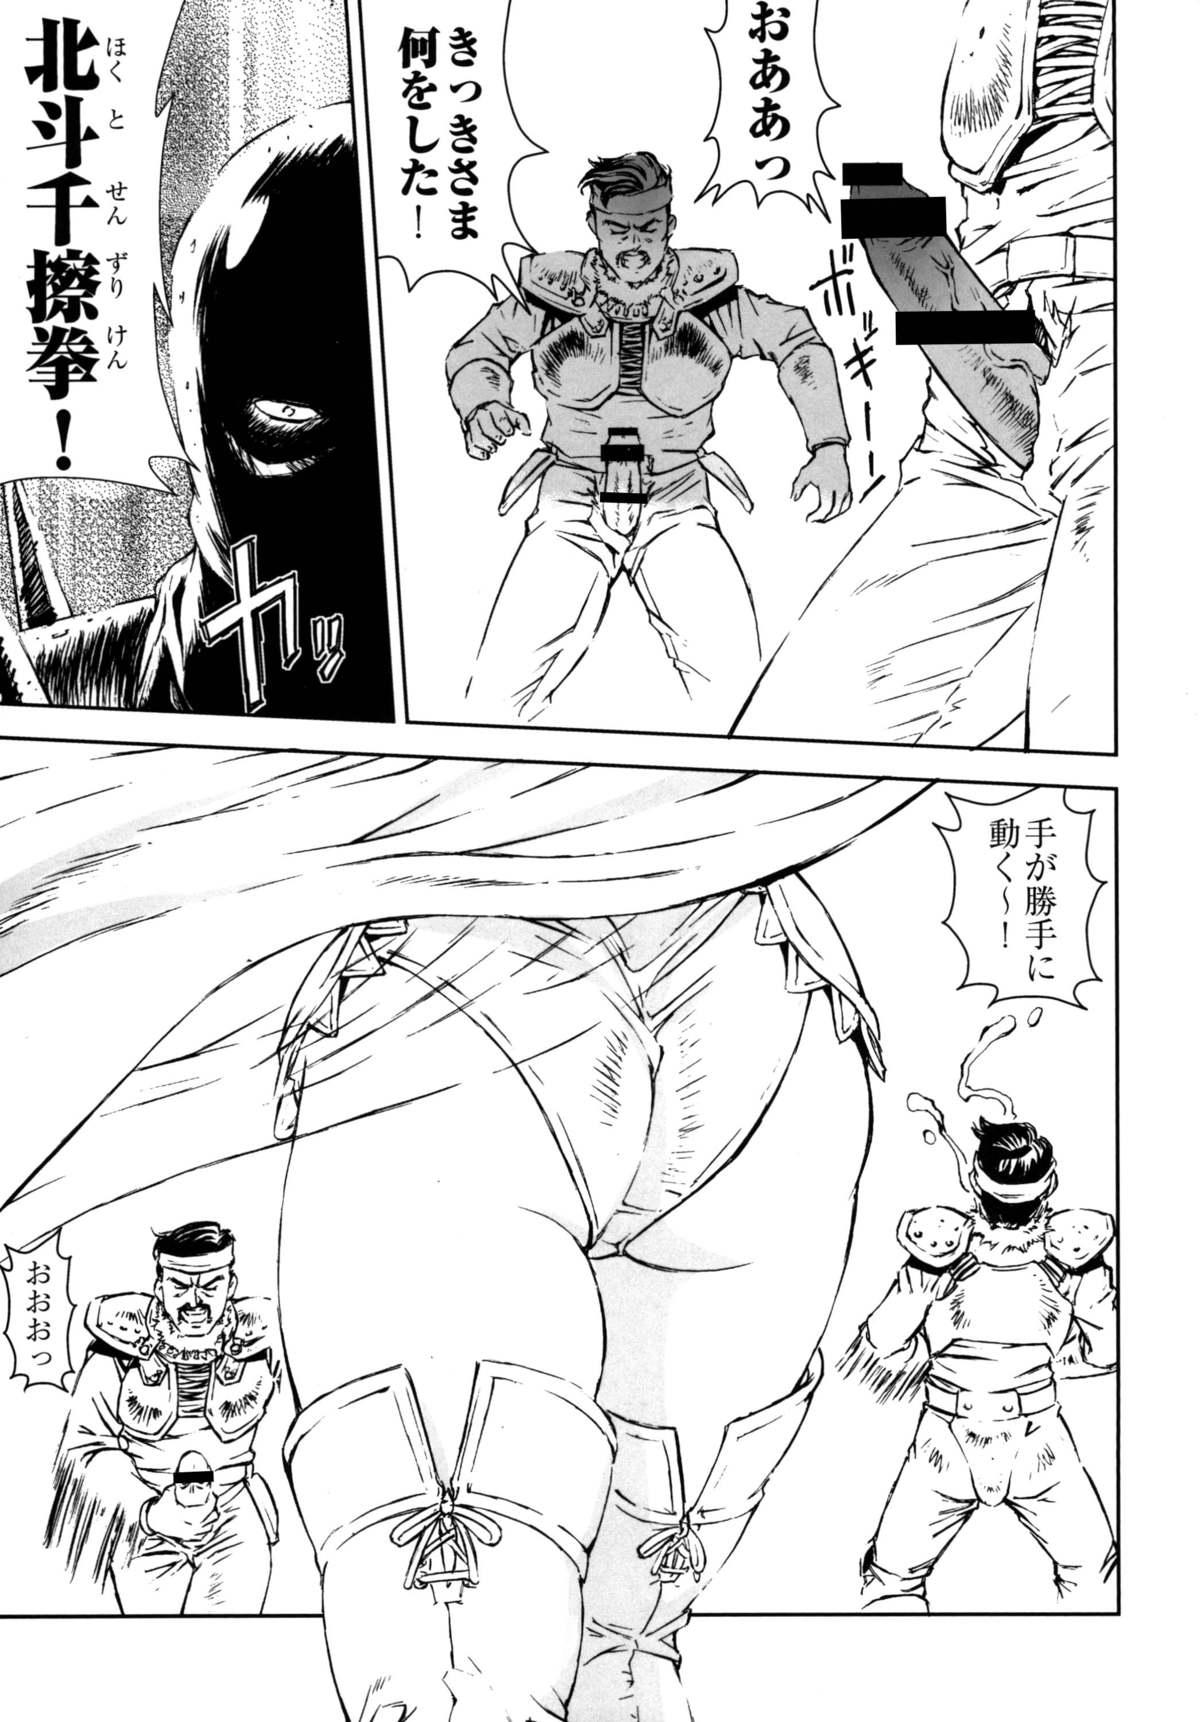 Cocksuckers HOT BITCH JUMP 2 - Kochikame Fist of the north star Fucked - Page 6